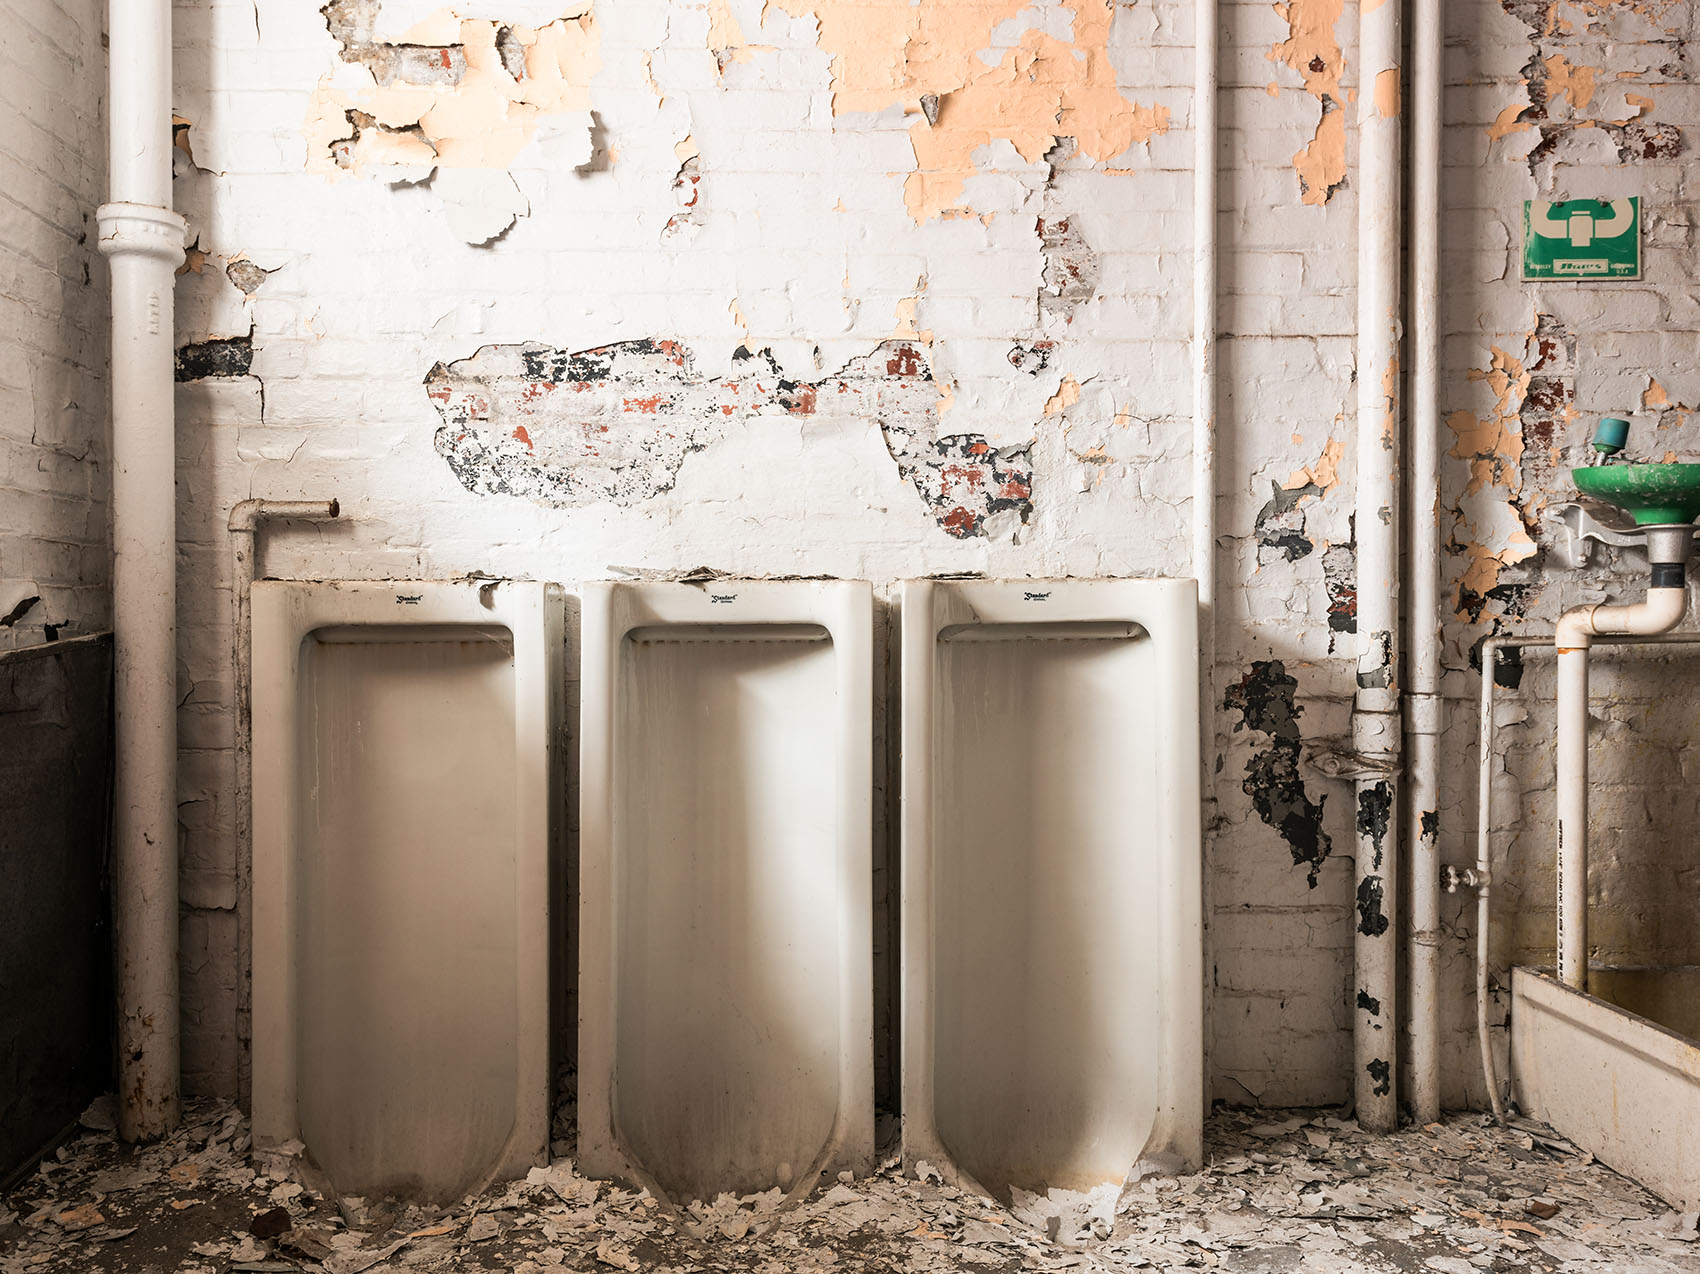 Abandoned Stall, Urban Exploration, Old Bathroom, Urinal, Decaying